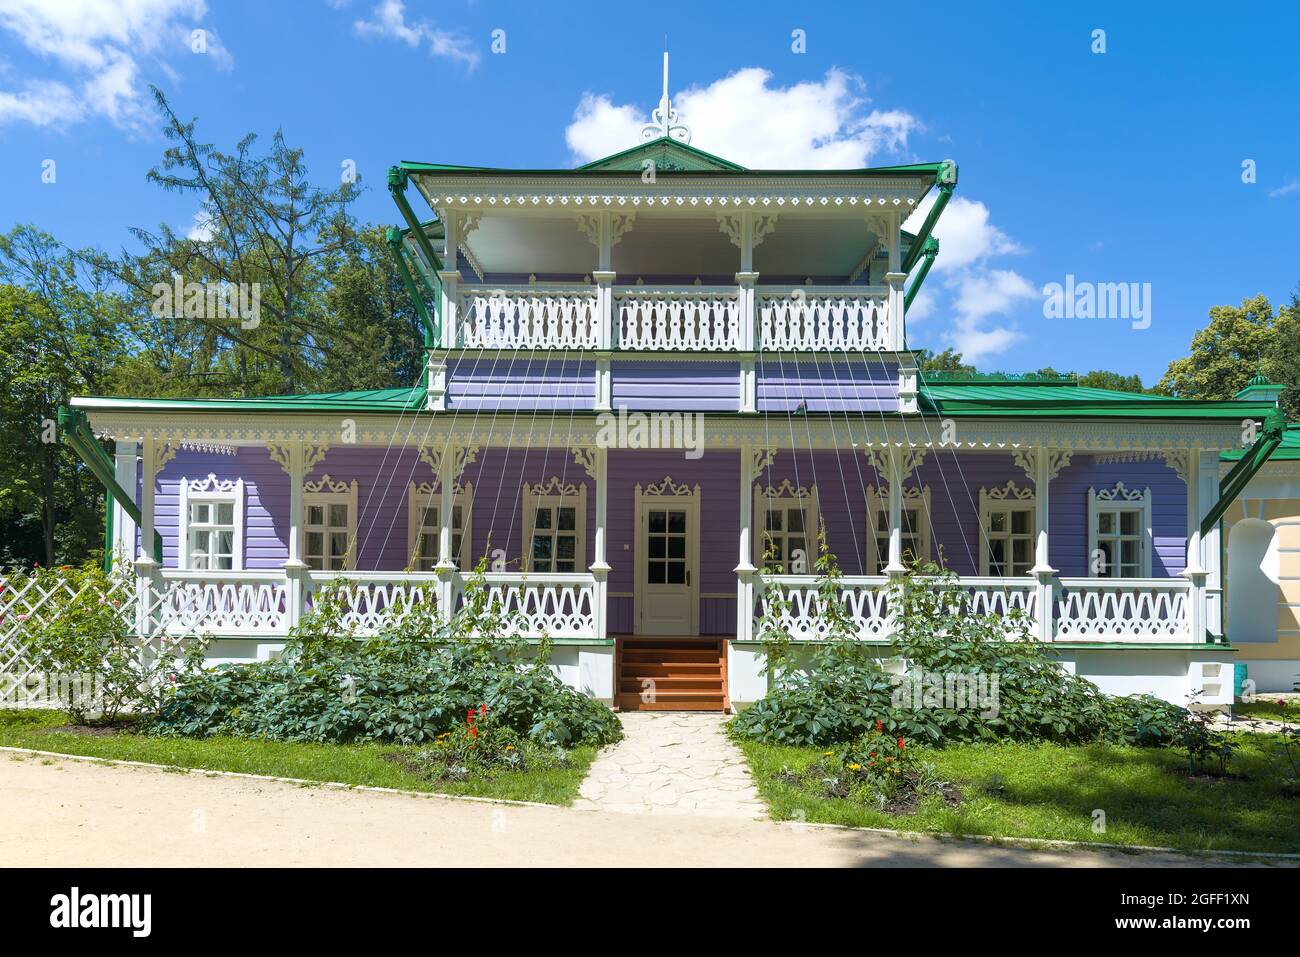 SPASSKOE-LUTOVINOVO, RUSSIA - JULY 06, 2021: View of the manor house from the veranda in the estate of the mother of the Russian writer I.S. Turgenev Stock Photo